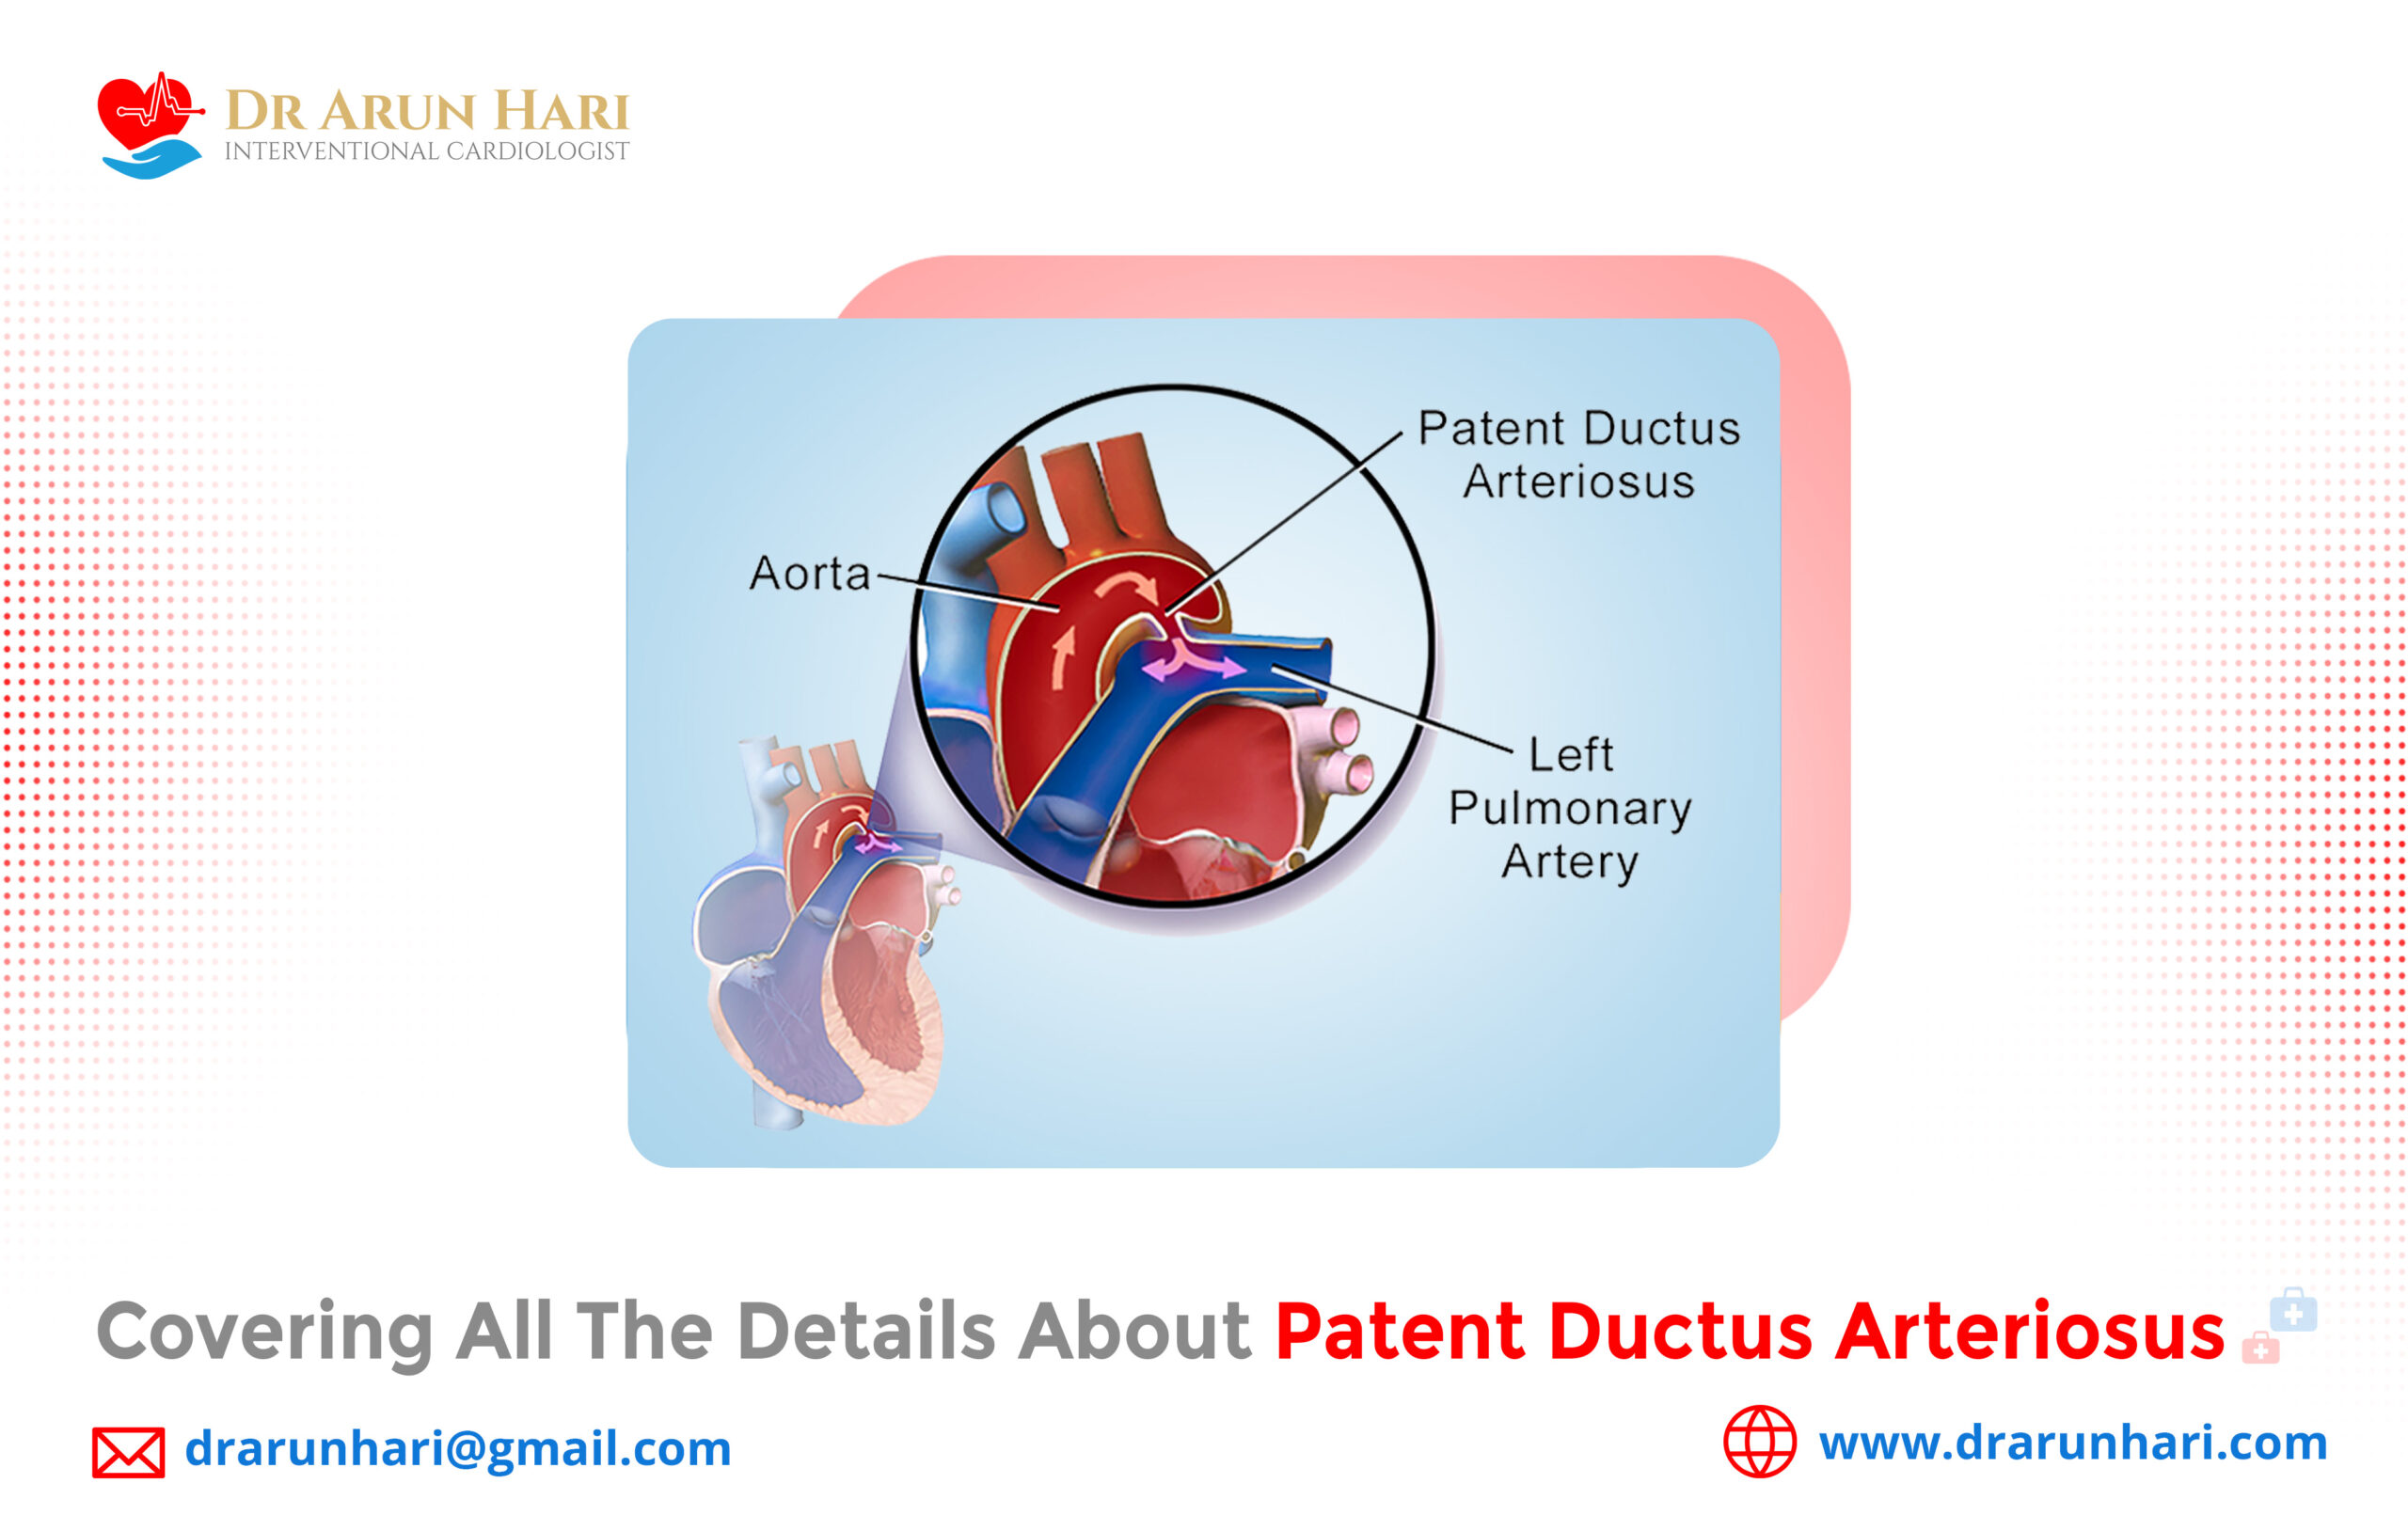 Covering All the Details about Patent Ductus Arteriosus